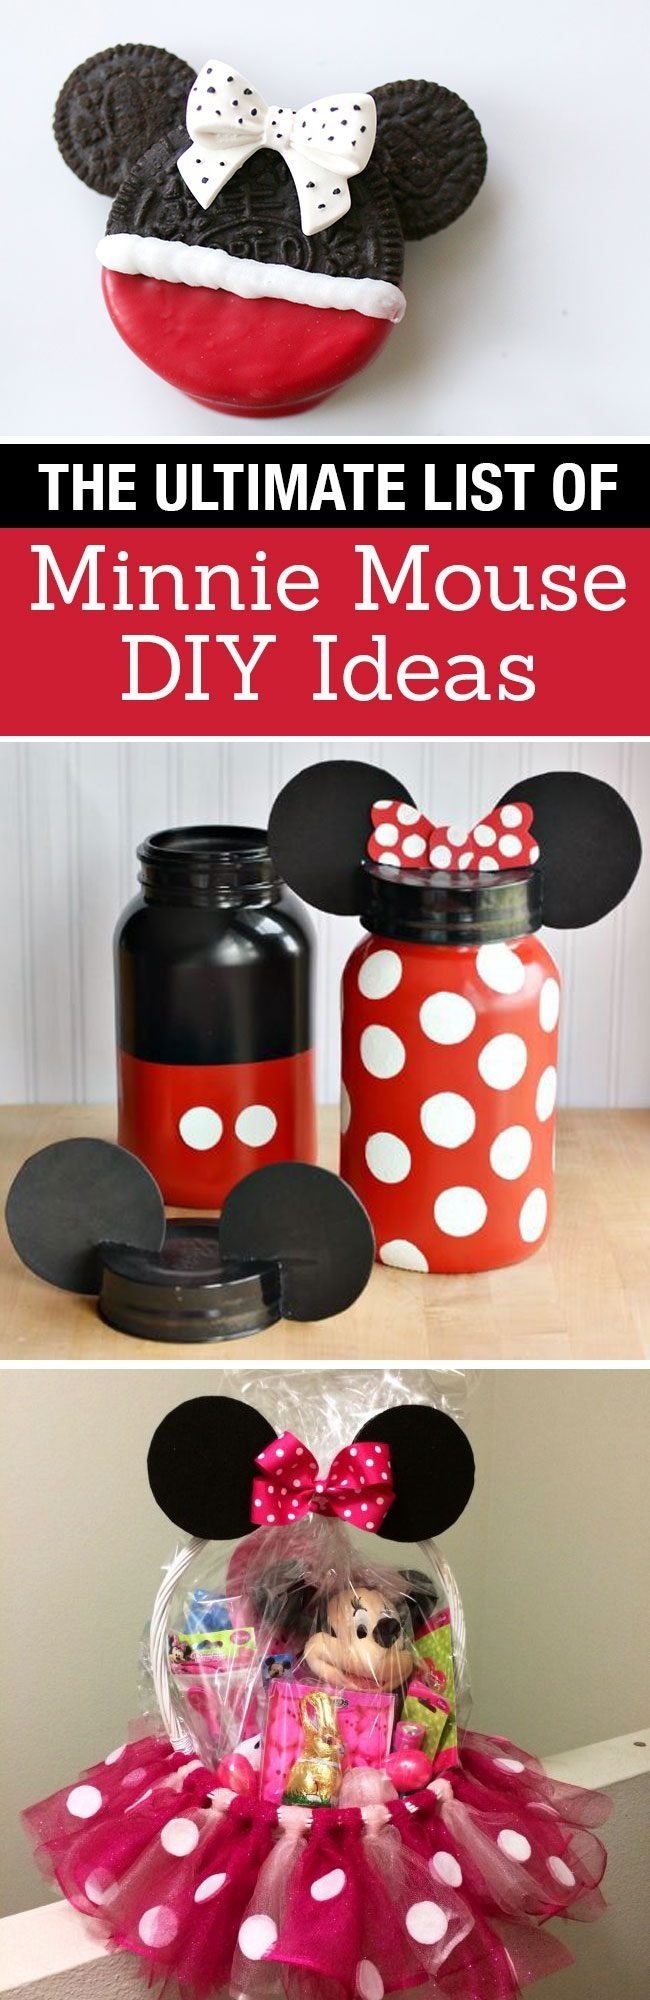 10 Spectacular Minnie Mouse Party Favors Ideas the ultimate list of minnie mouse craft ideas disney party ideas 1 2022